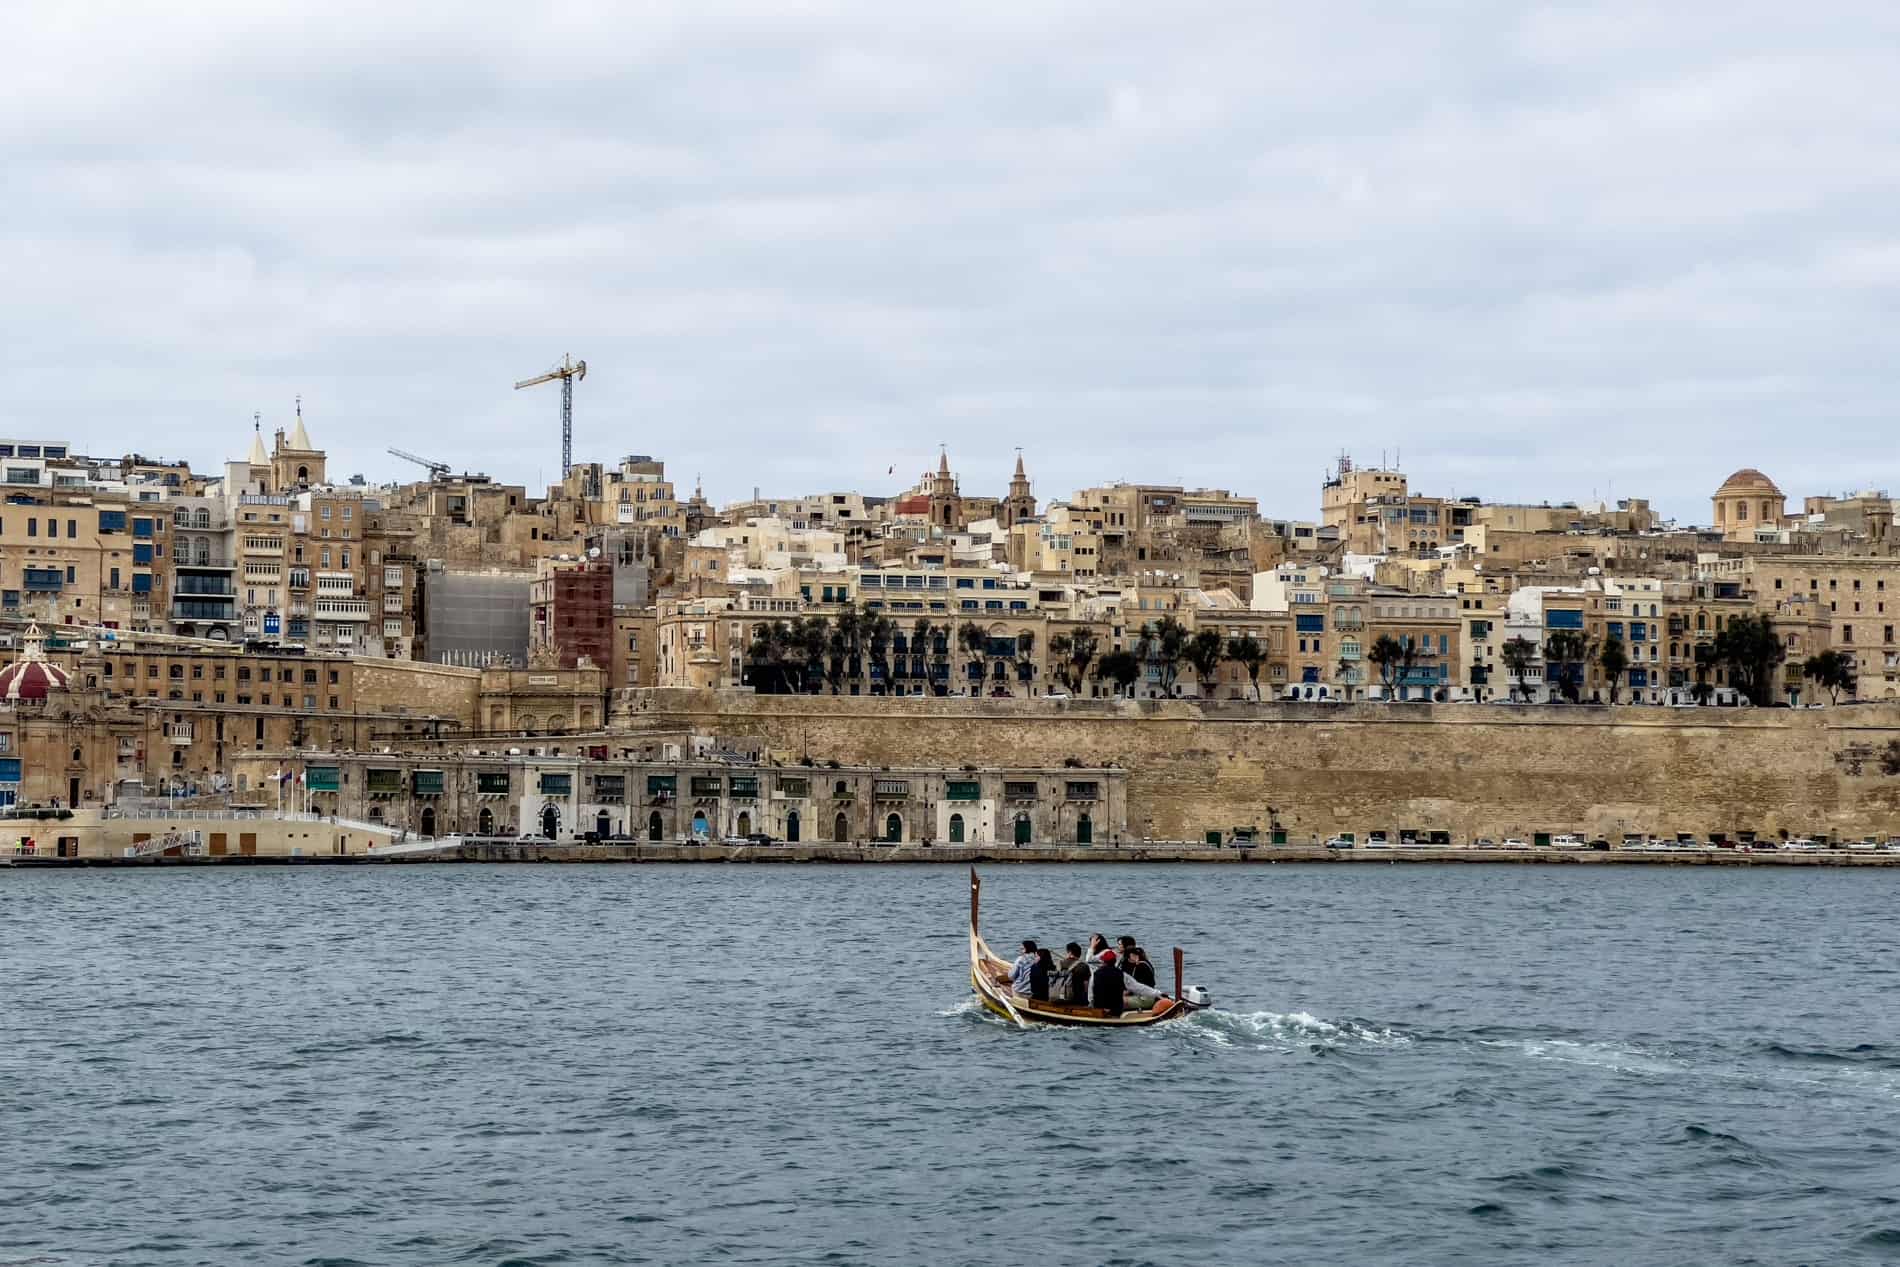 People on a wooden water taxi boat in Malta cruising on the water in the direction of the walled city of Valletta. 